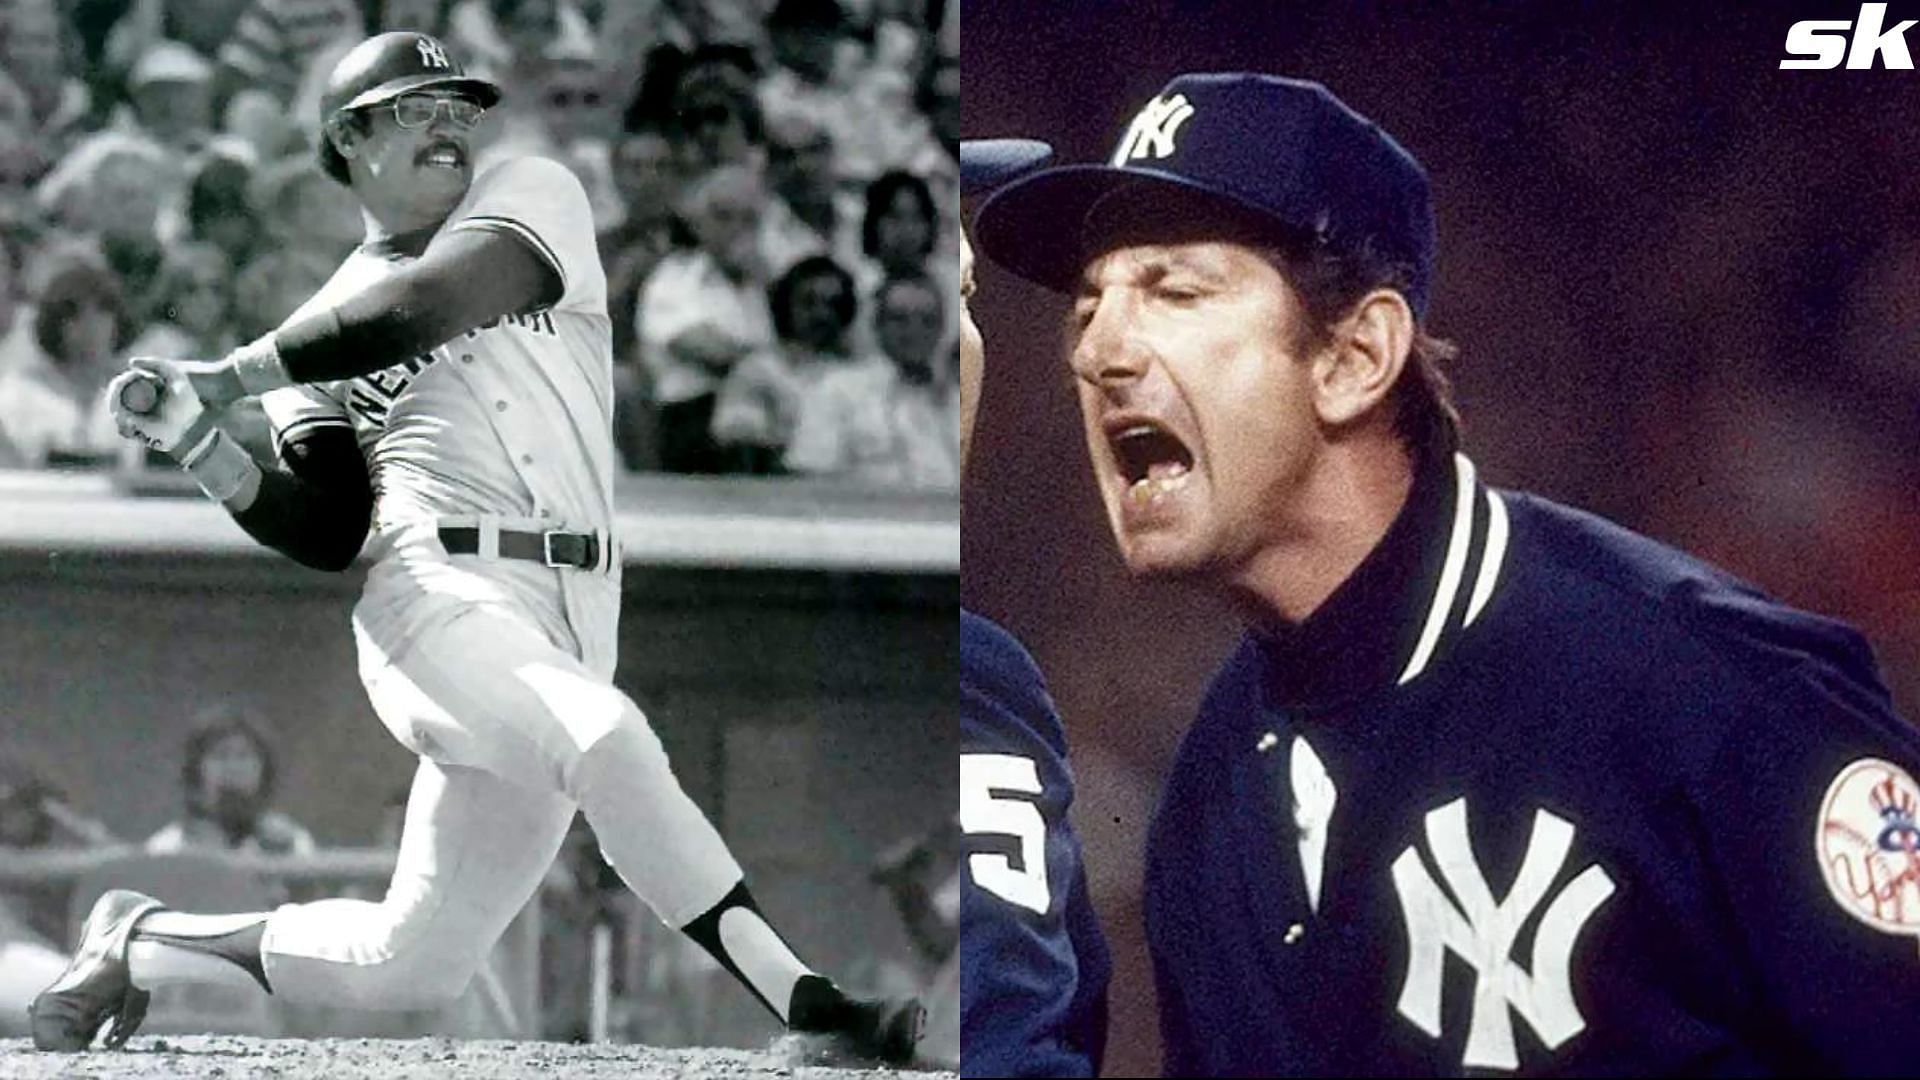 When infamous New York Yankees star Reggie Jackson faced off with manager Billy Martin in the dugout